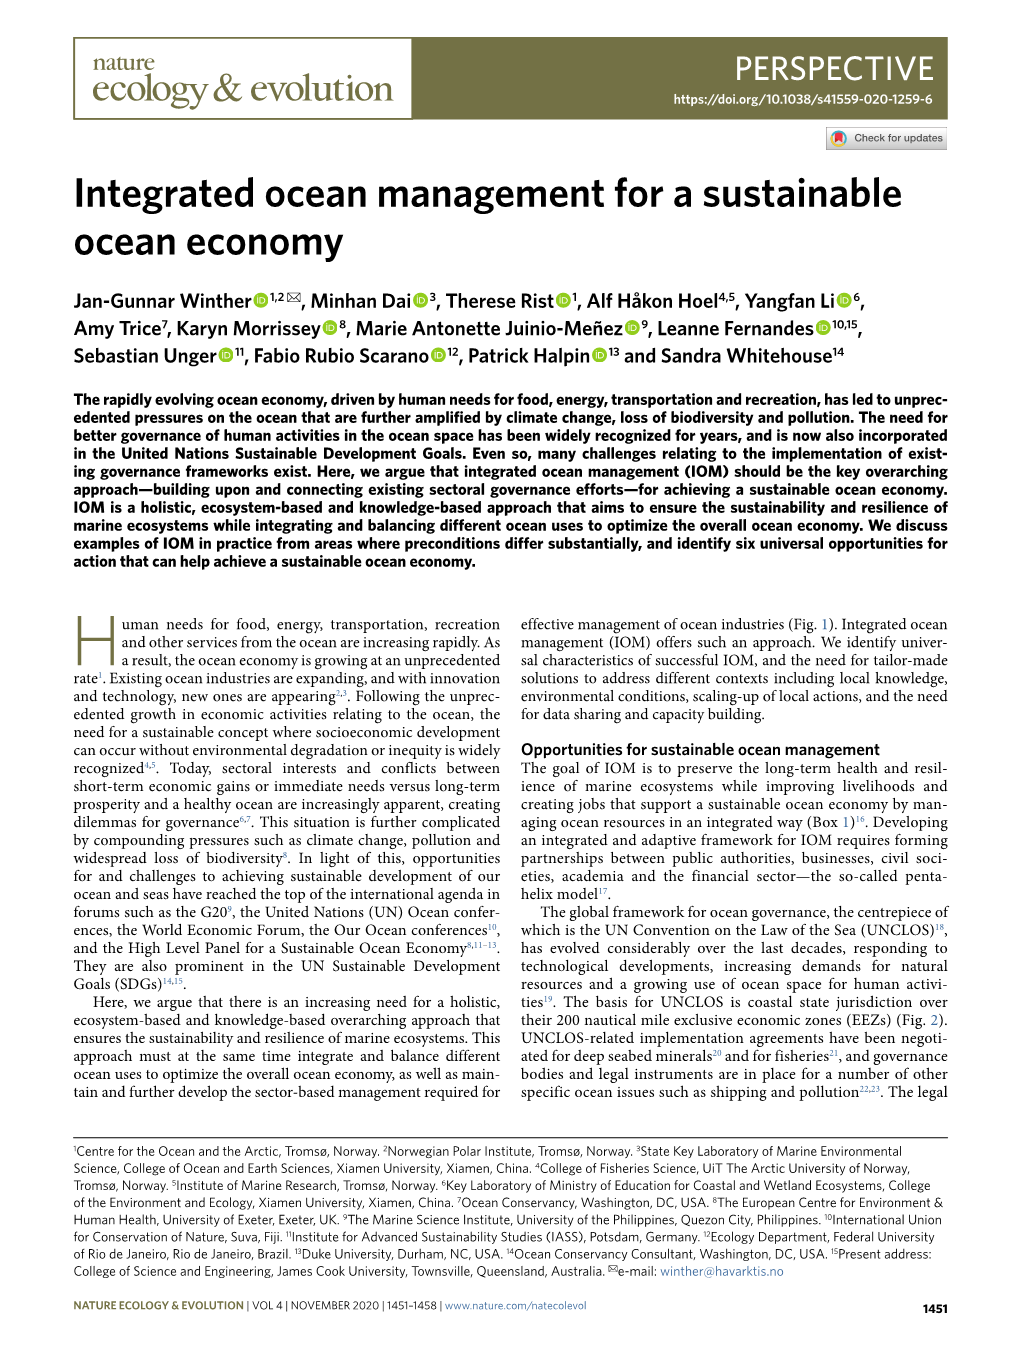 Integrated Ocean Management for a Sustainable Ocean Economy